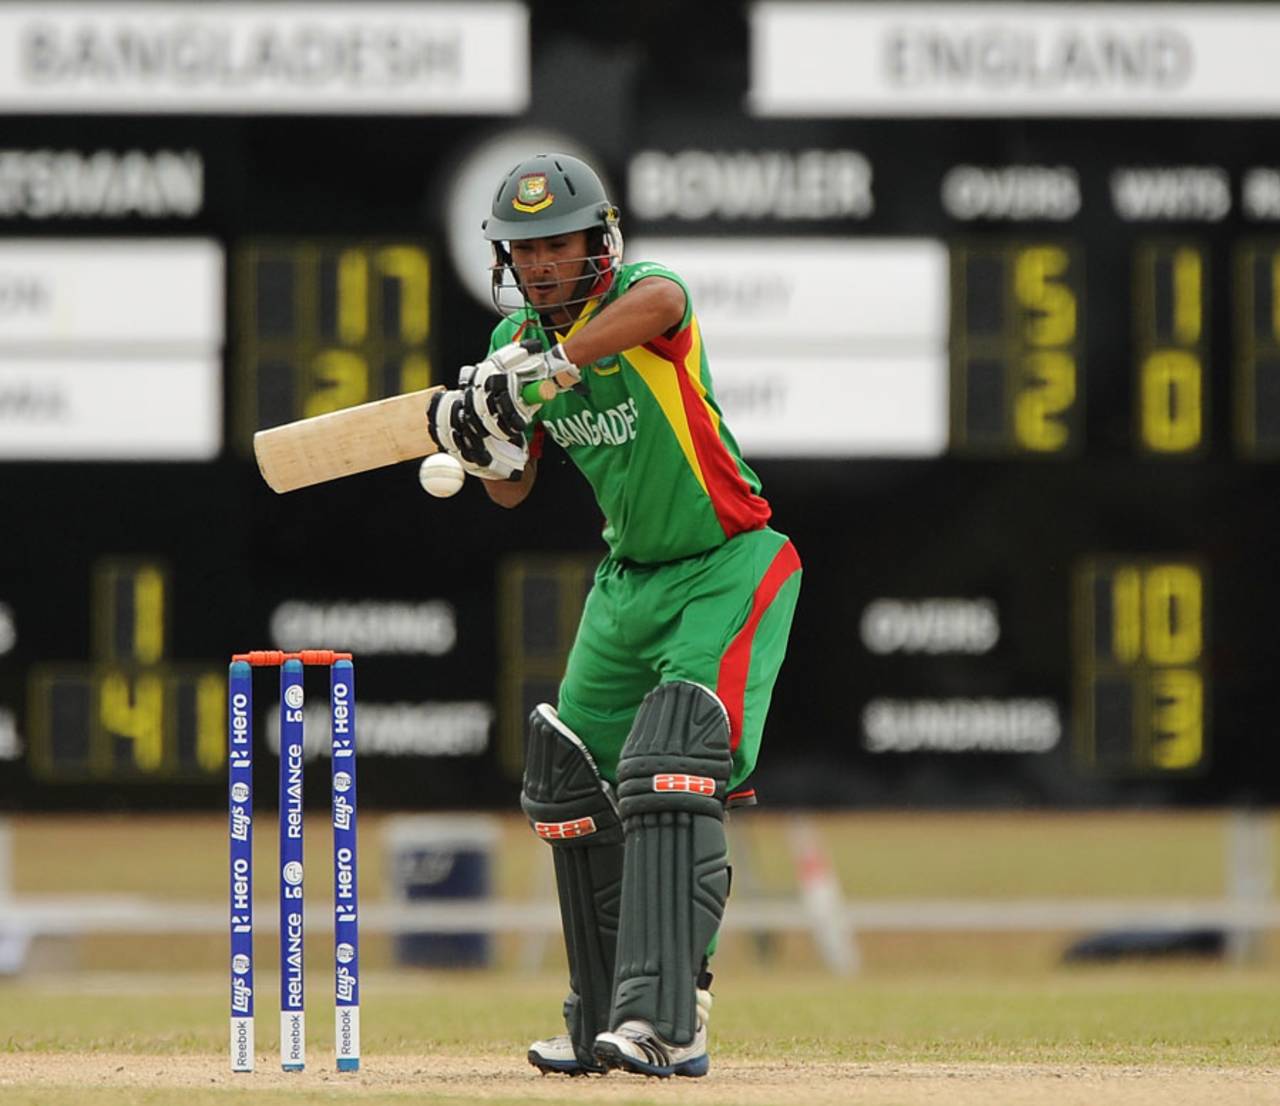 Litton Das made 102 off 134 balls, Bangladesh v England, ICC Under-19 World Cup 5th place play-off Semi-final, Townsville, August 21, 2012